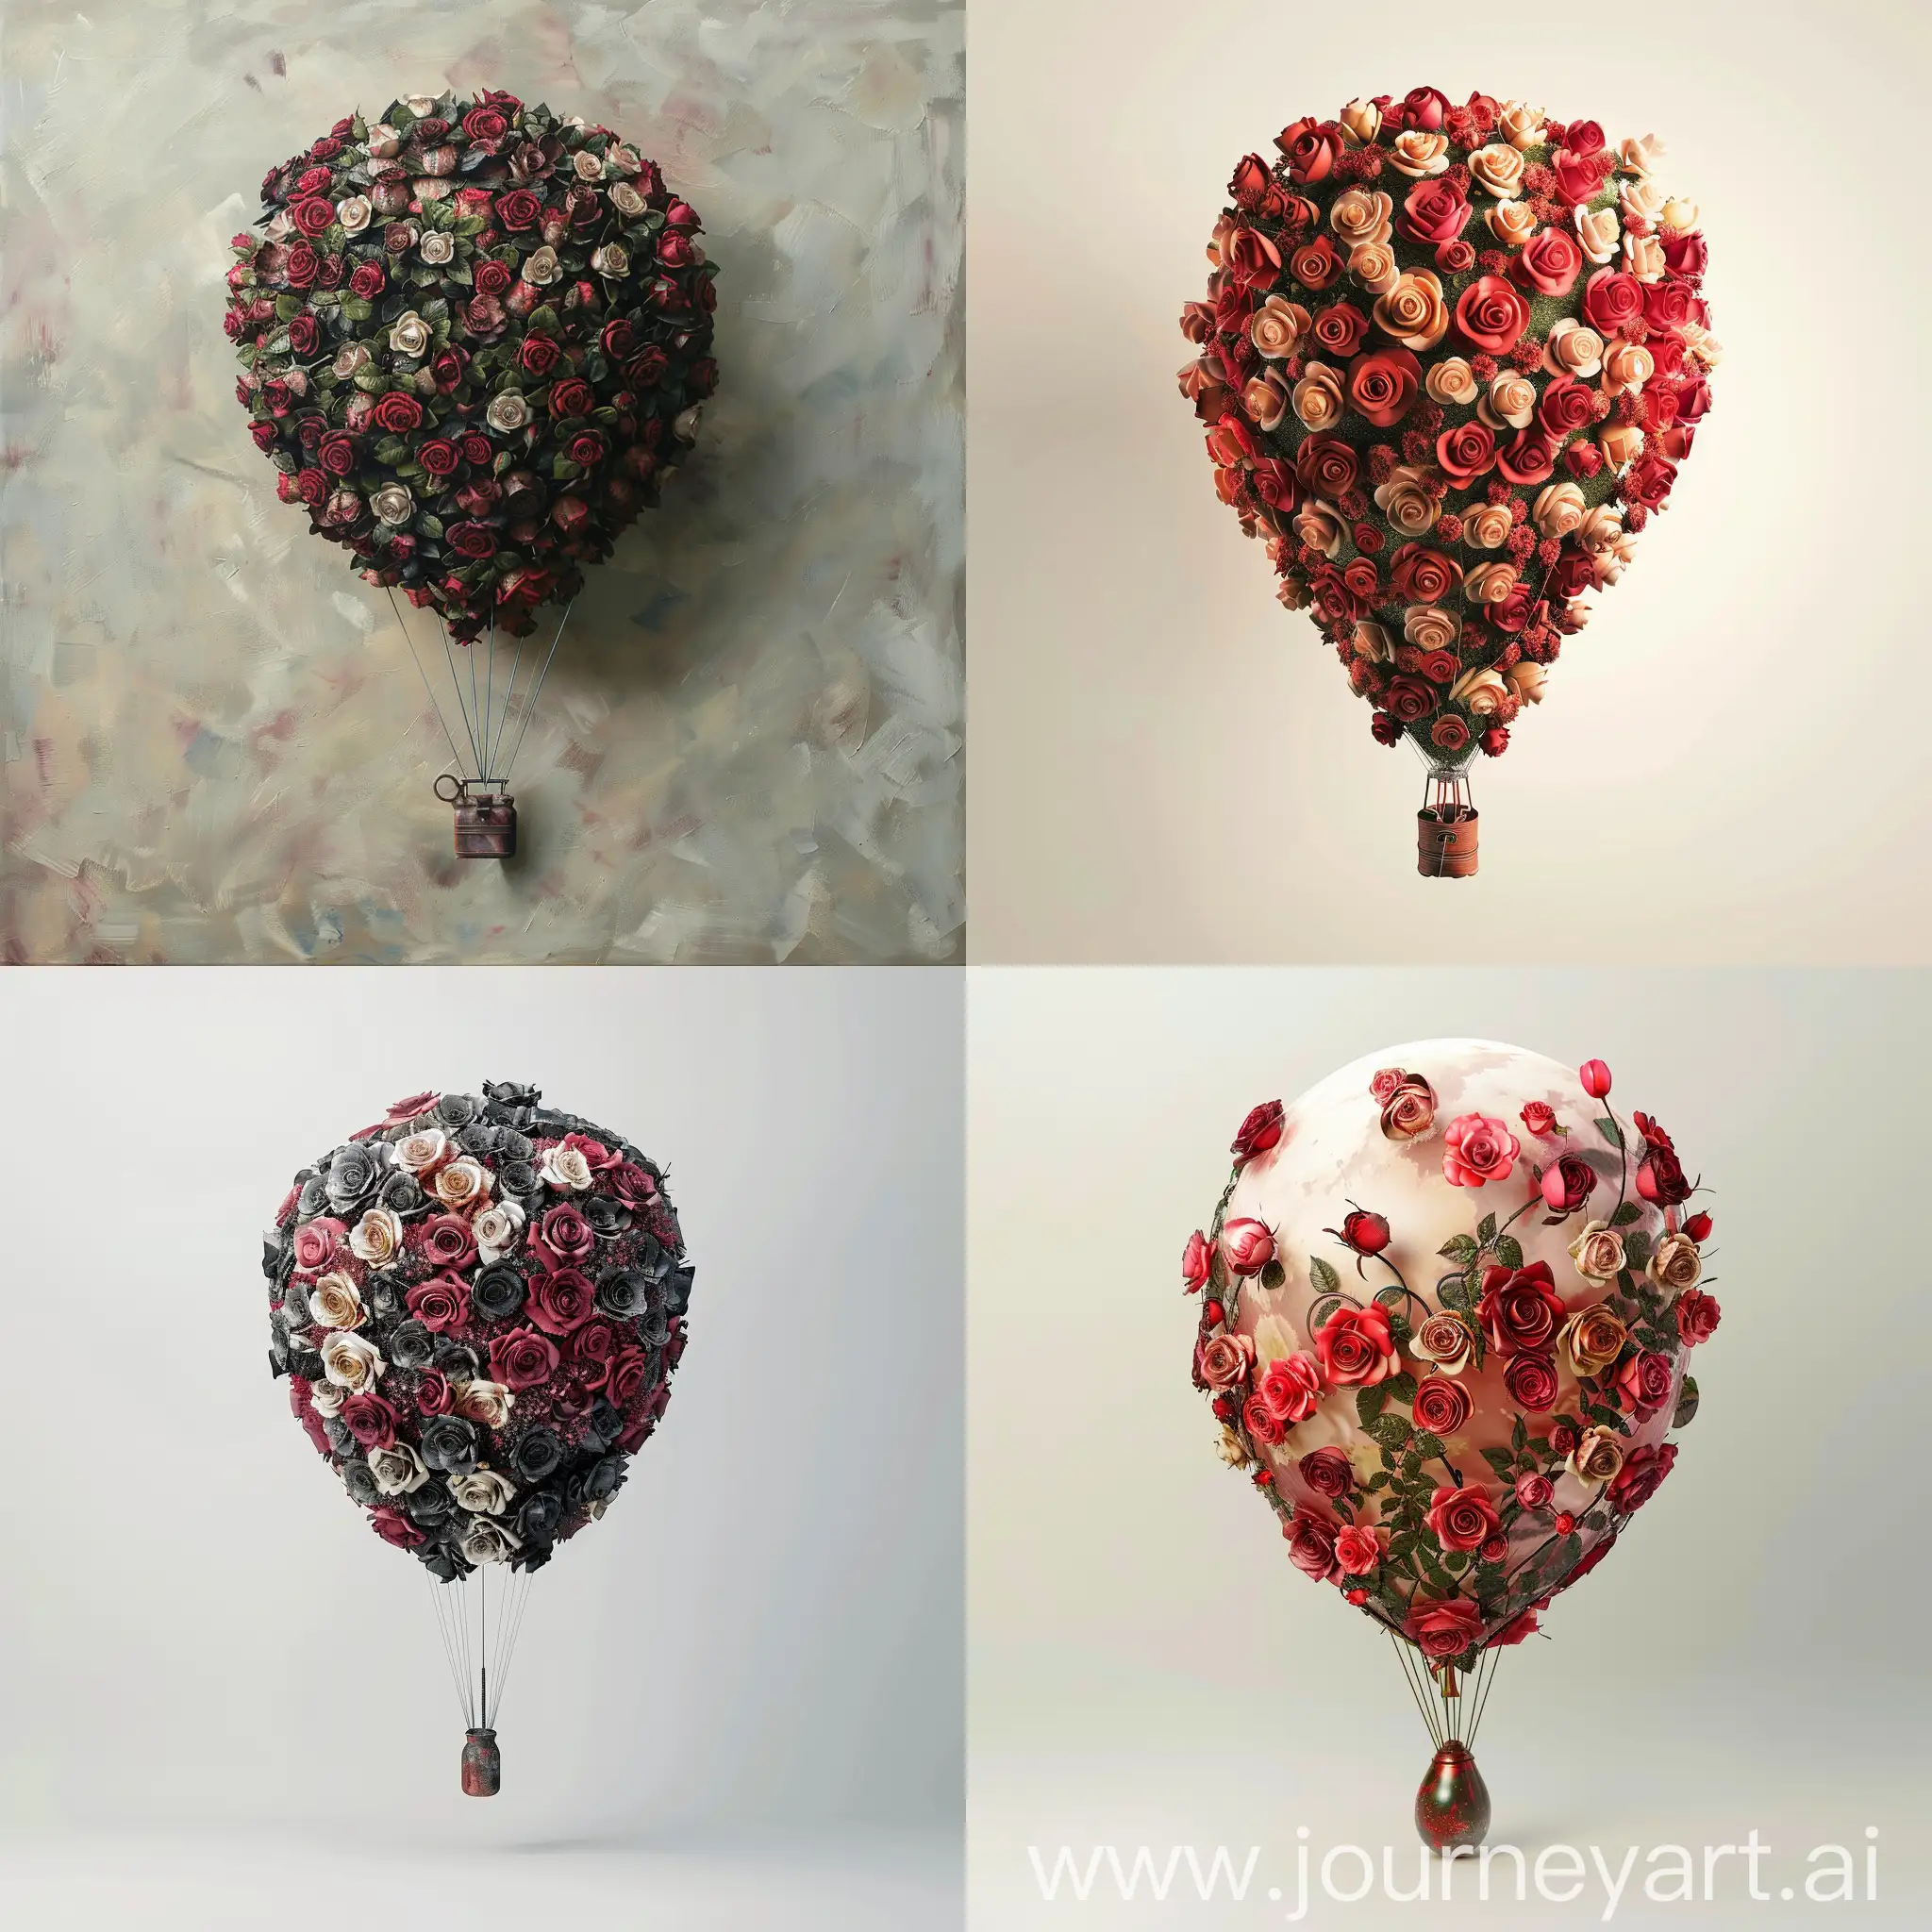 a balloon made of petrol and roses